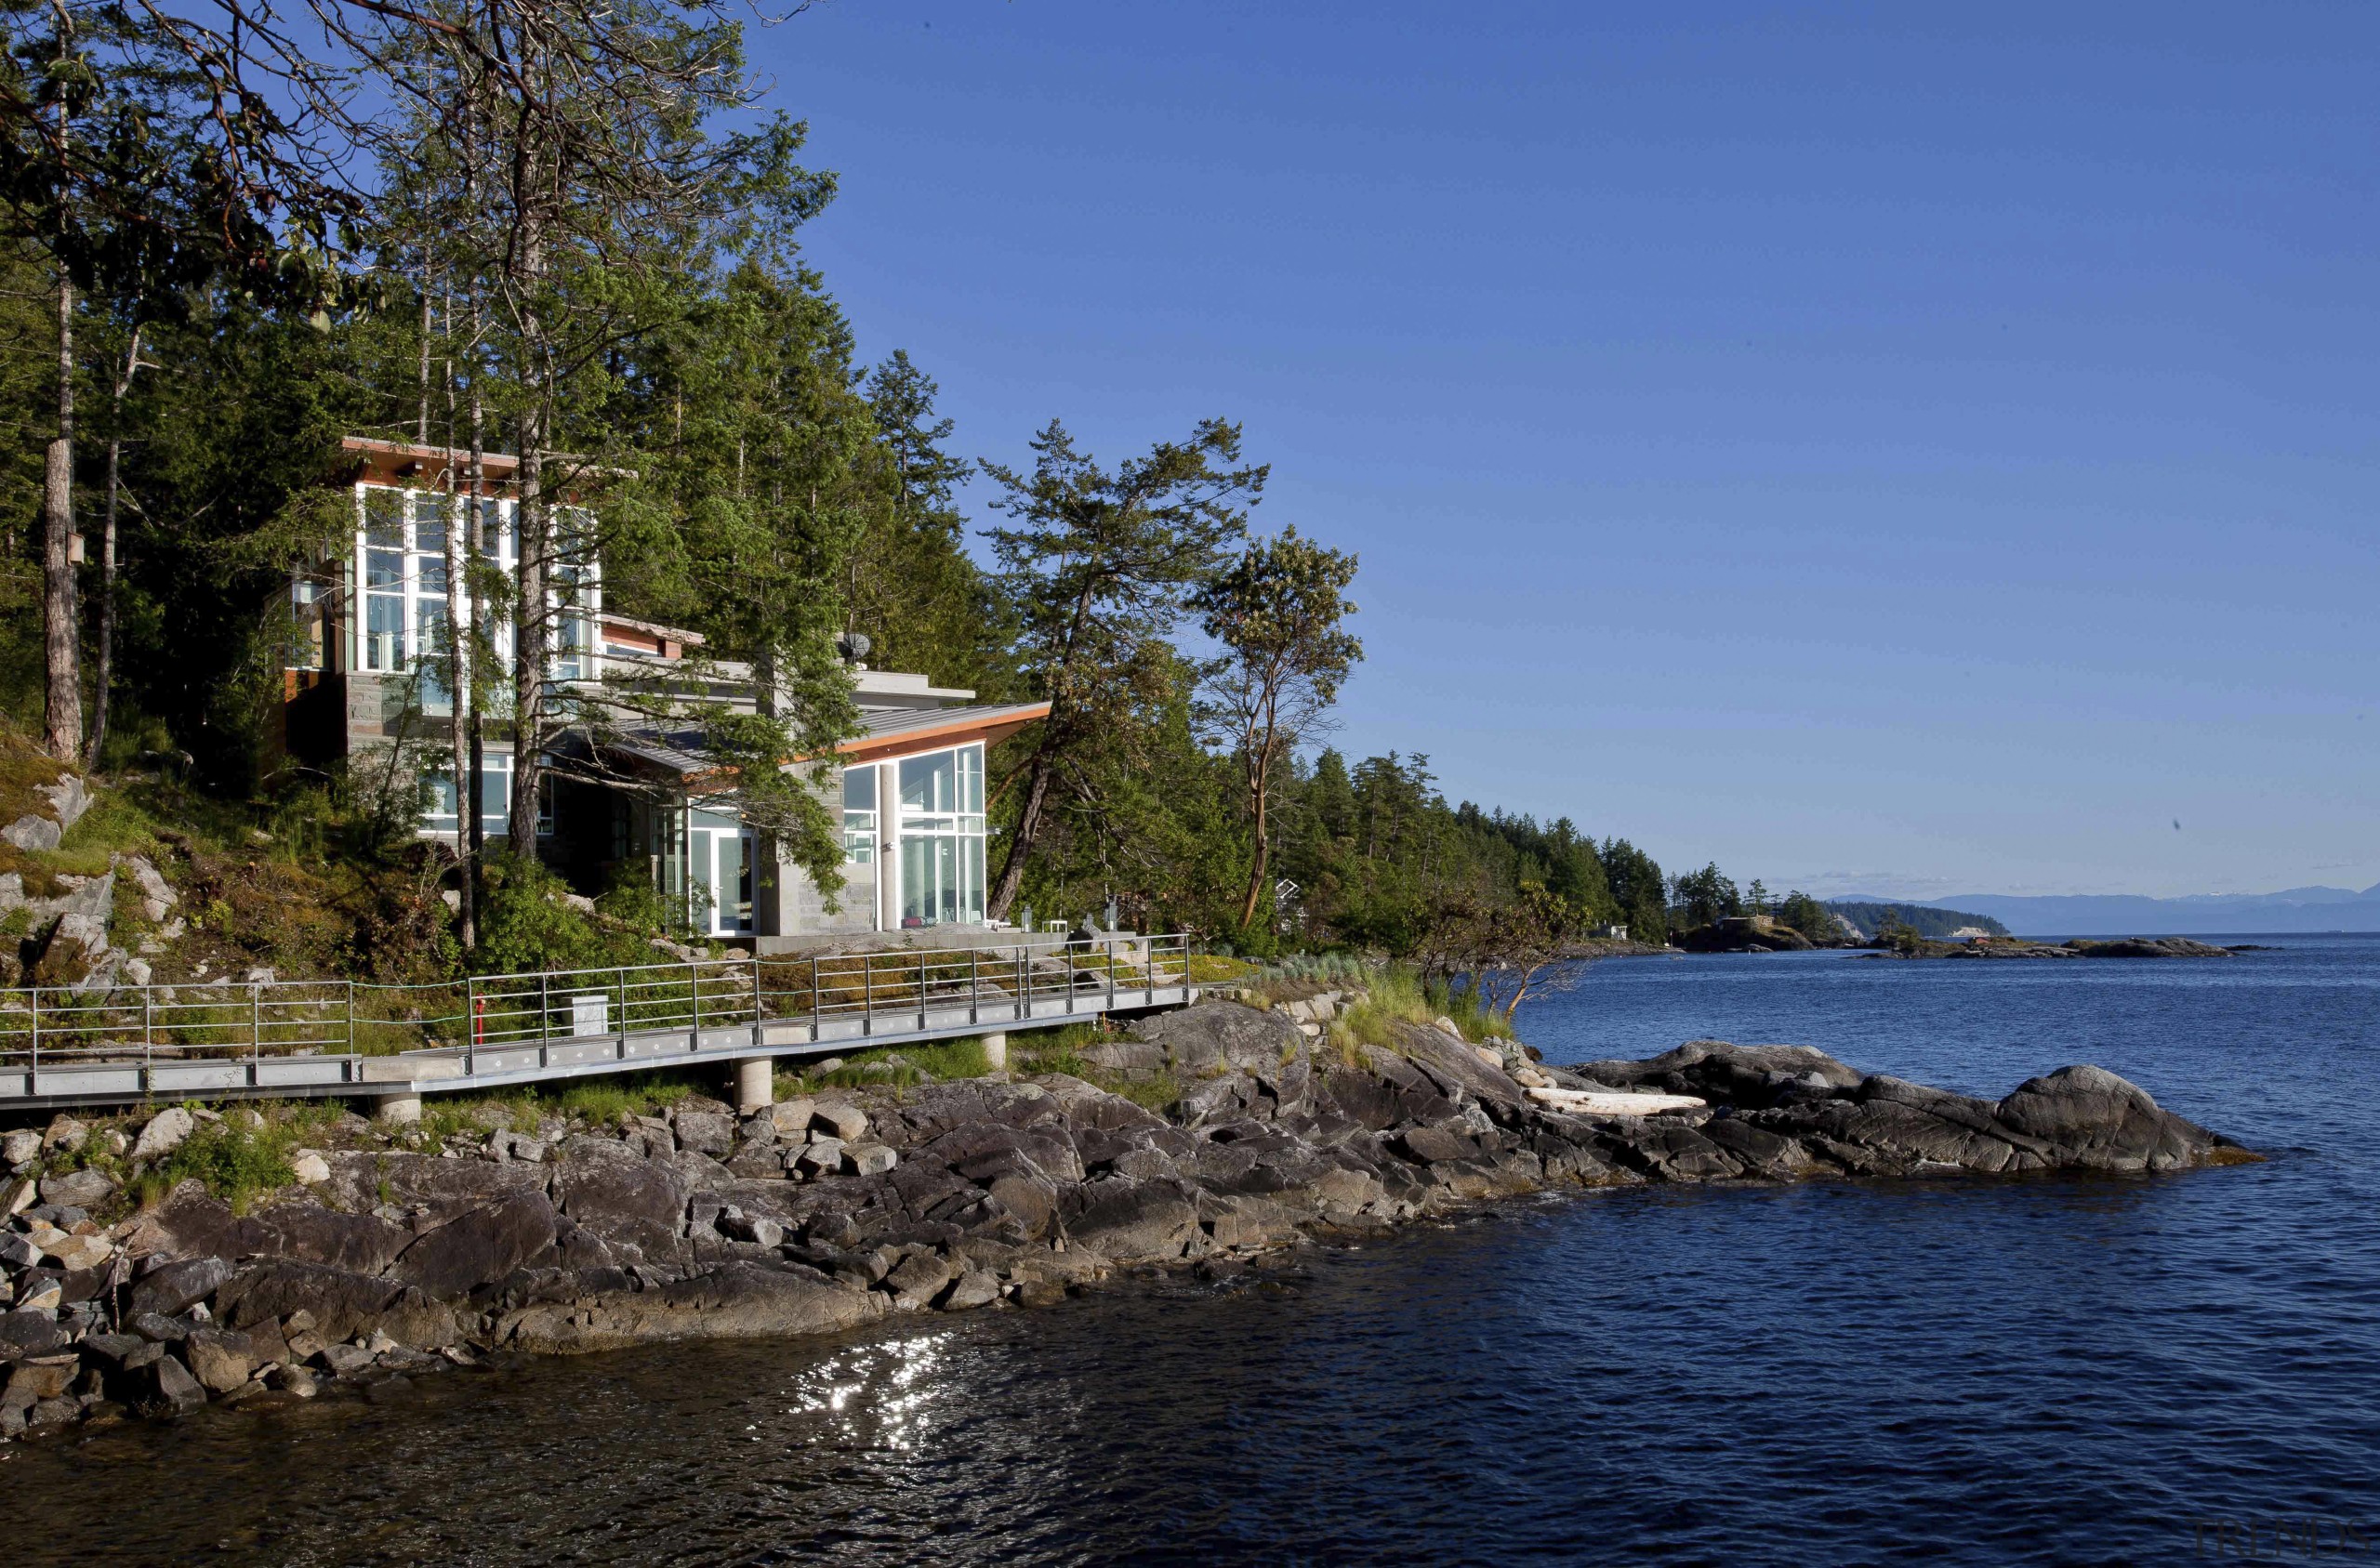 View of waterfront house. - View of waterfront bay, coast, cottage, home, house, inlet, lake, real estate, sea, shore, sky, tree, water, blue